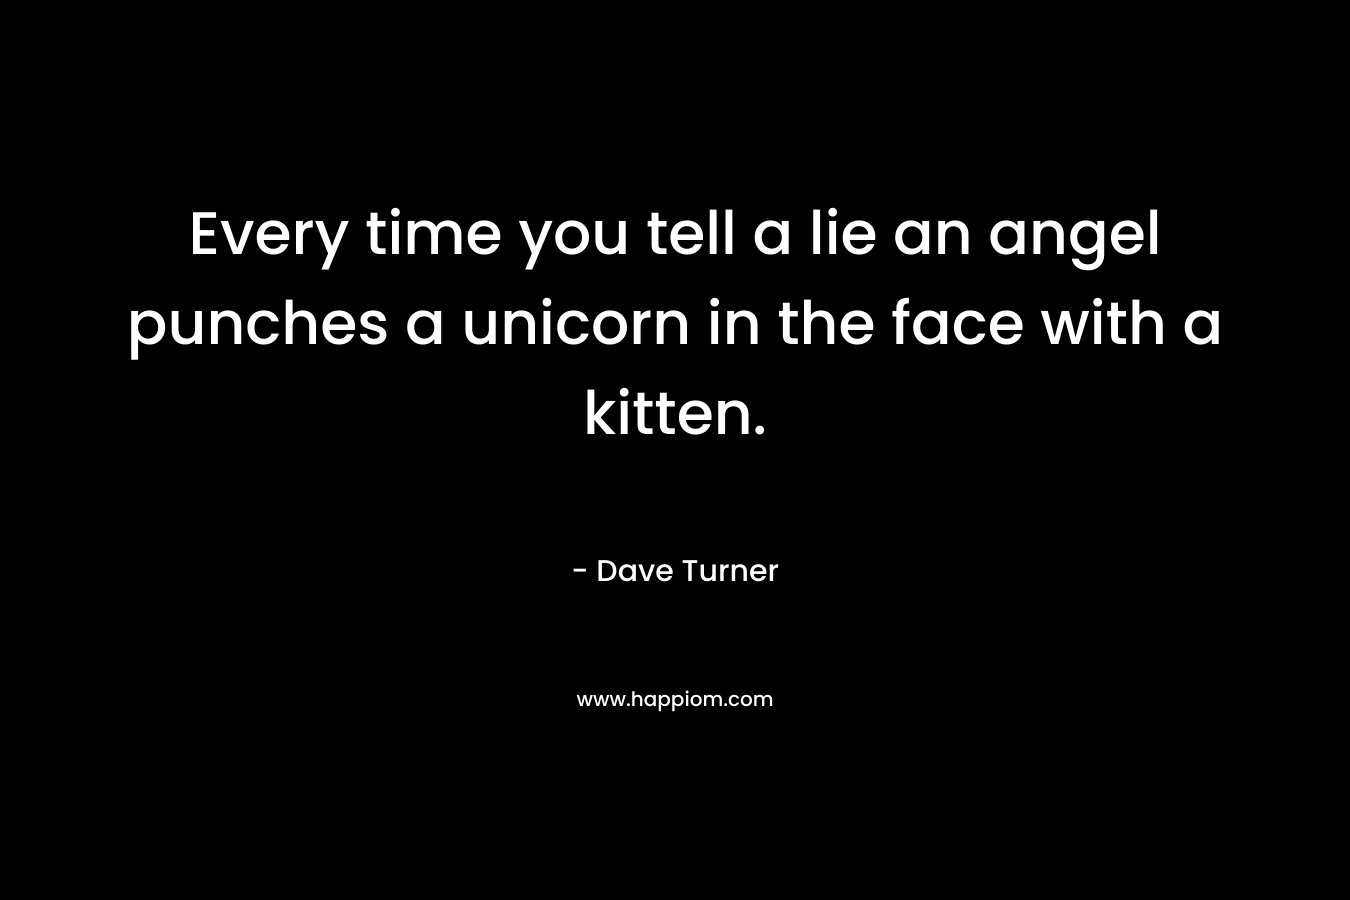 Every time you tell a lie an angel punches a unicorn in the face with a kitten. – Dave Turner